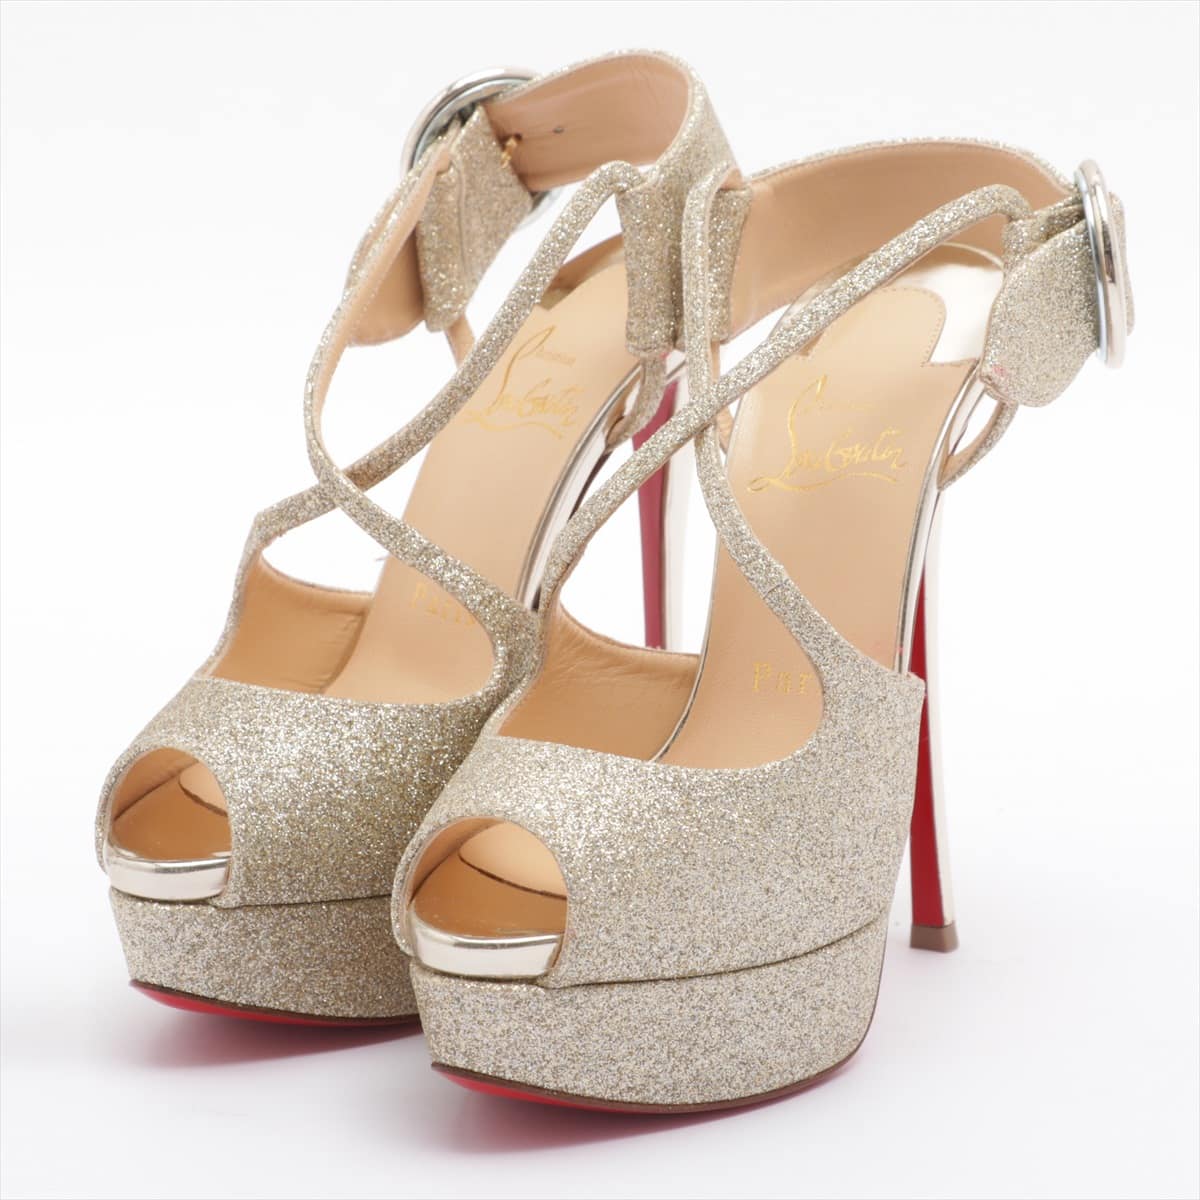 Christian Louboutin Leather Sandals 35.5 Ladies' Gold Glitter